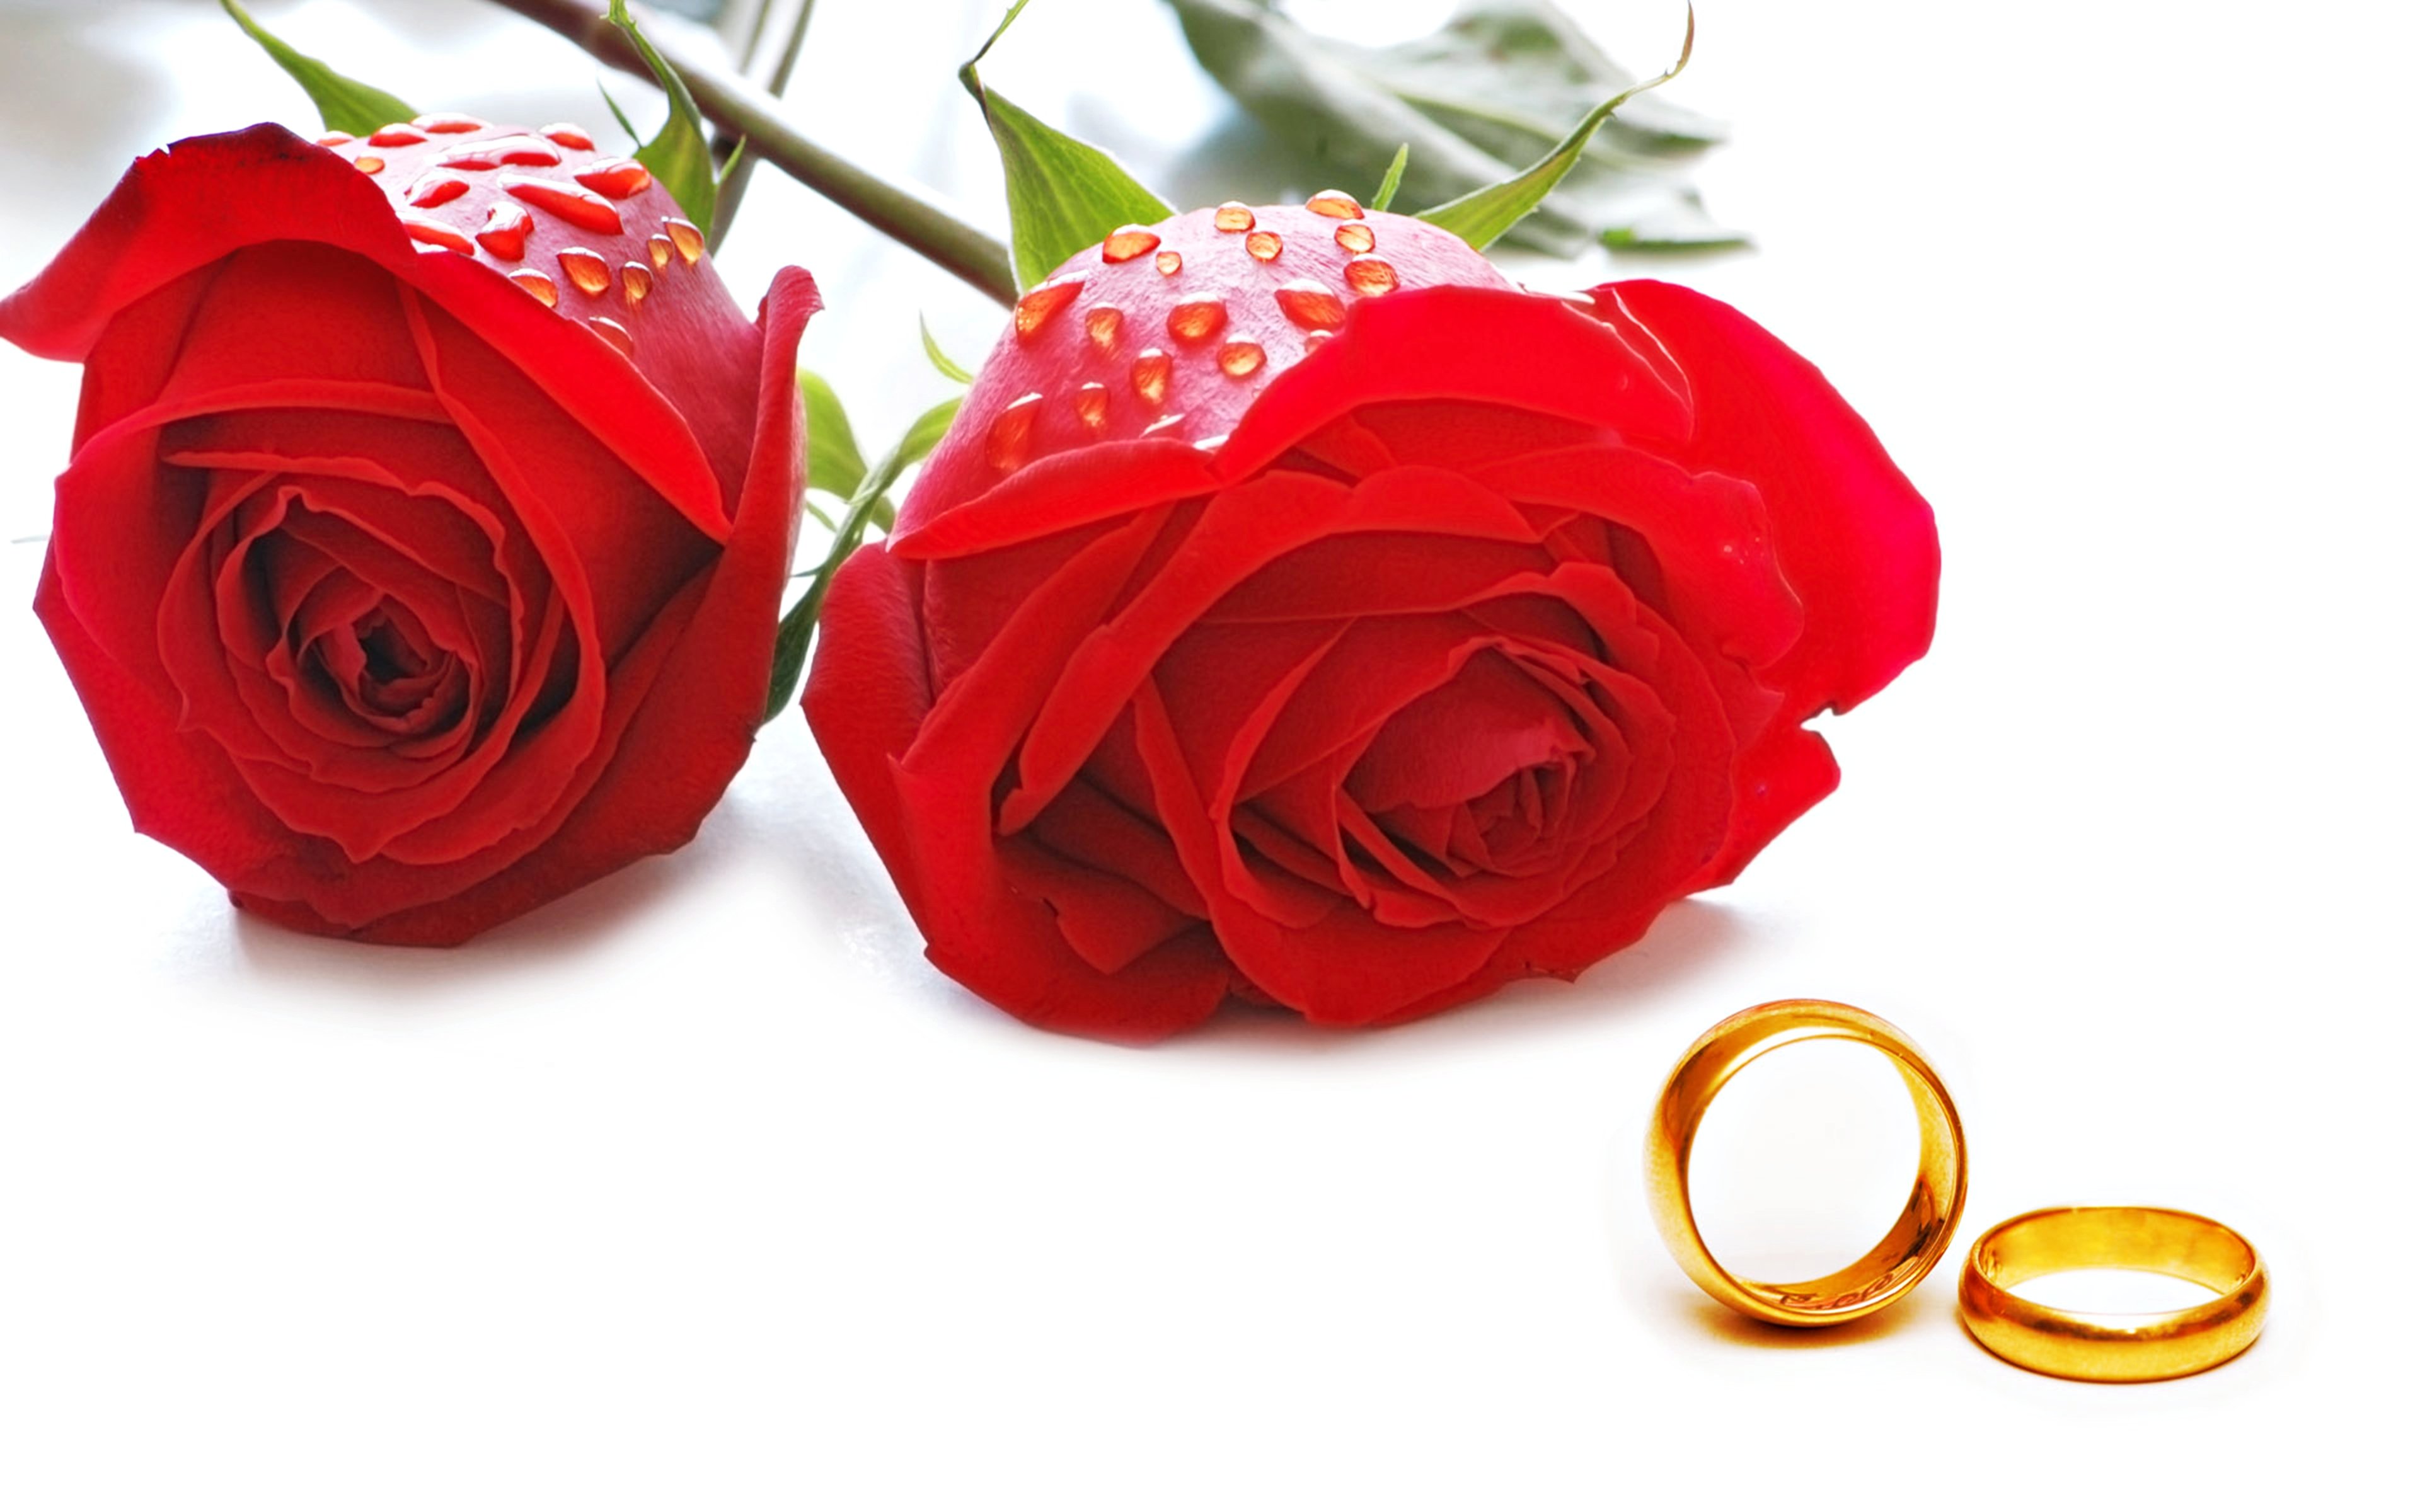 flowers, Roses, Red, Love, Couple, Marriage, Rings, Engagement, Golden, Romantice Wallpaper